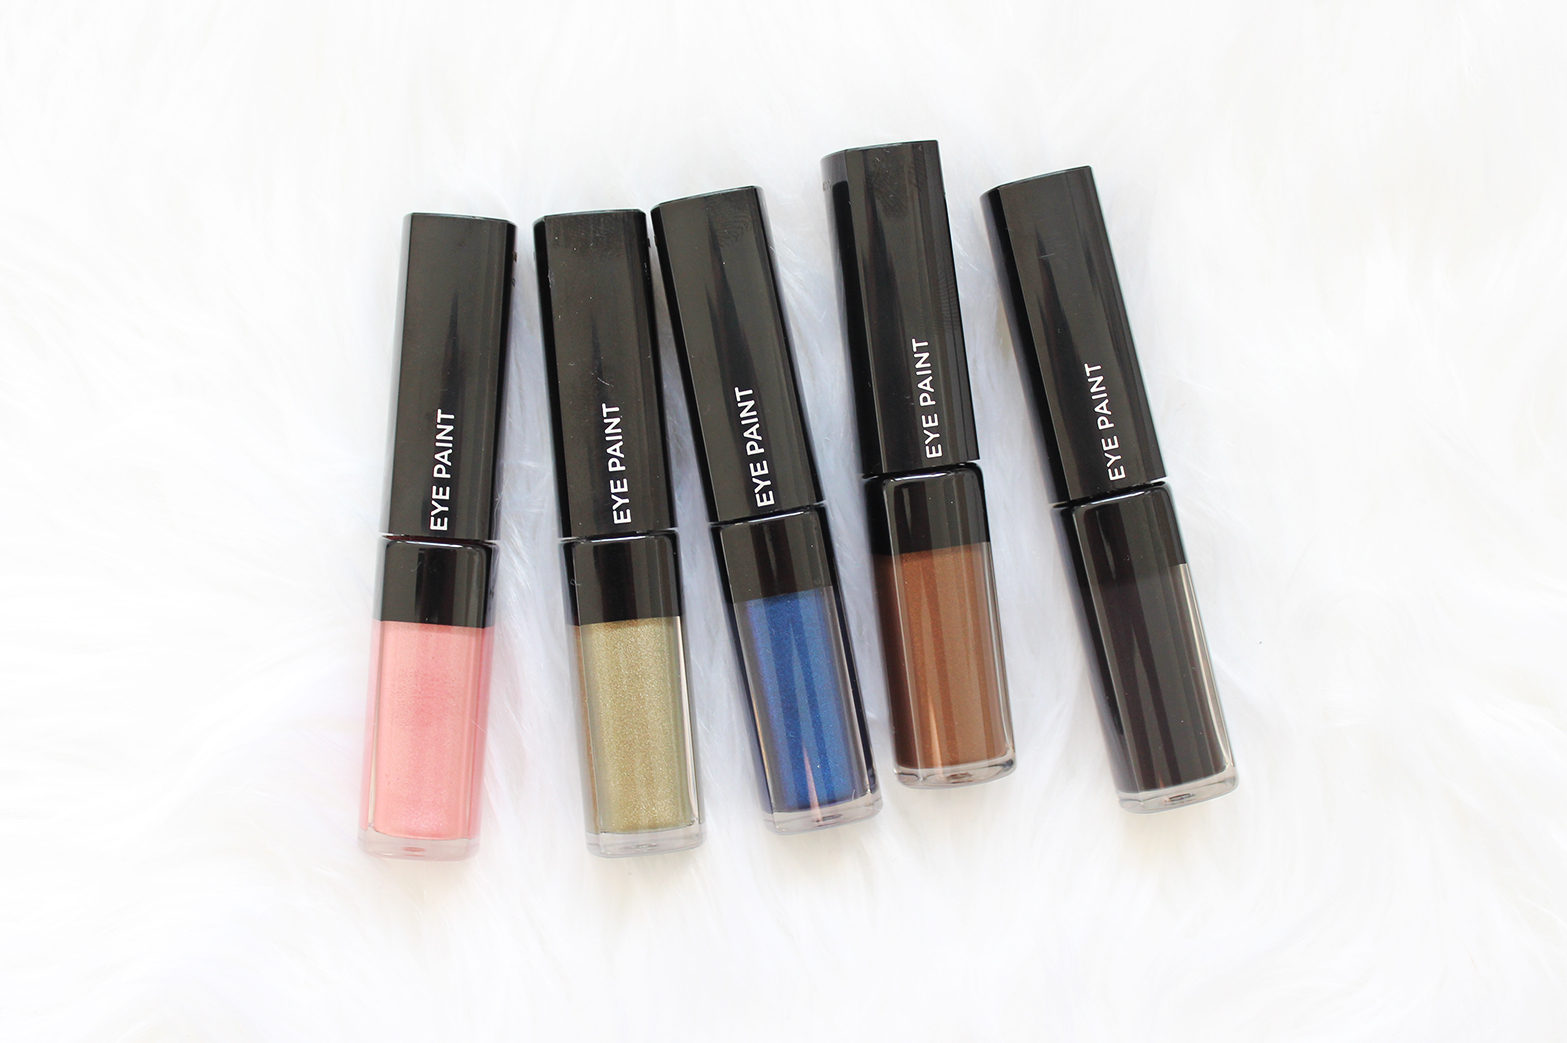 L'OREAL PARIS | New Eye Paints - Review + Swatches - CassandraMyee